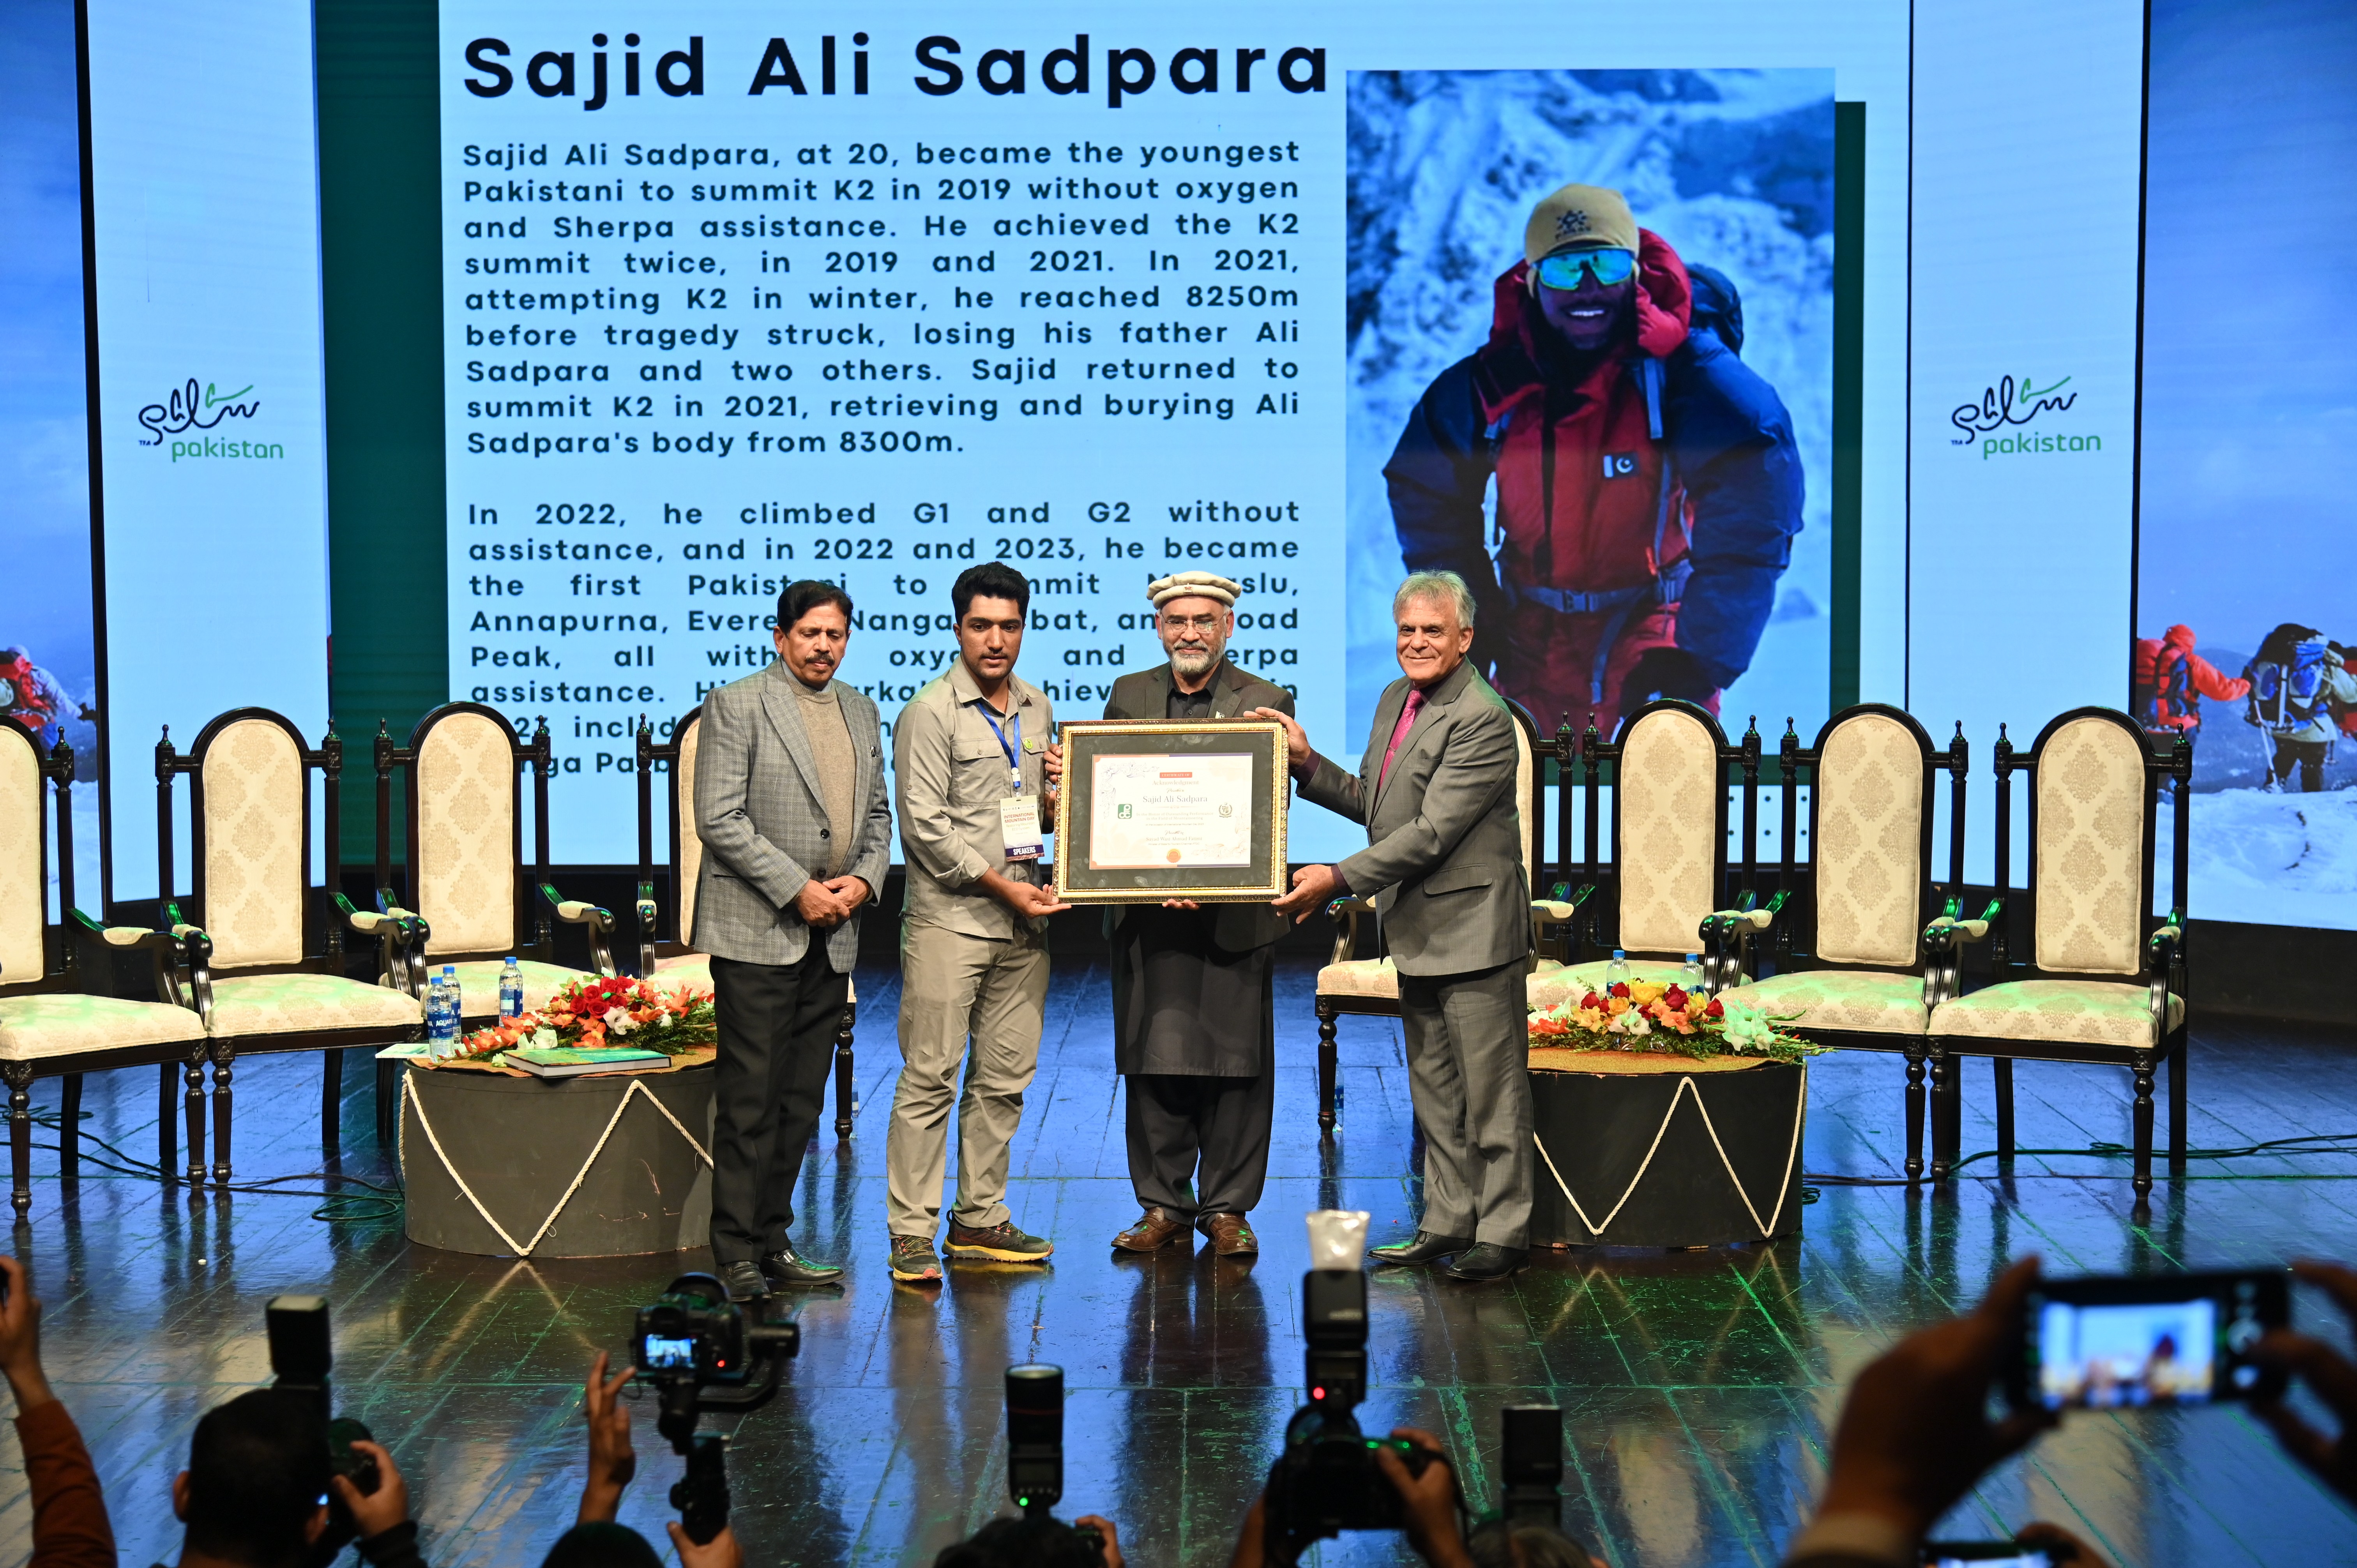 The certificate of acknowledgment presented to Sajid Ali Sadpara, a Pakistani high-altitude mountaineer